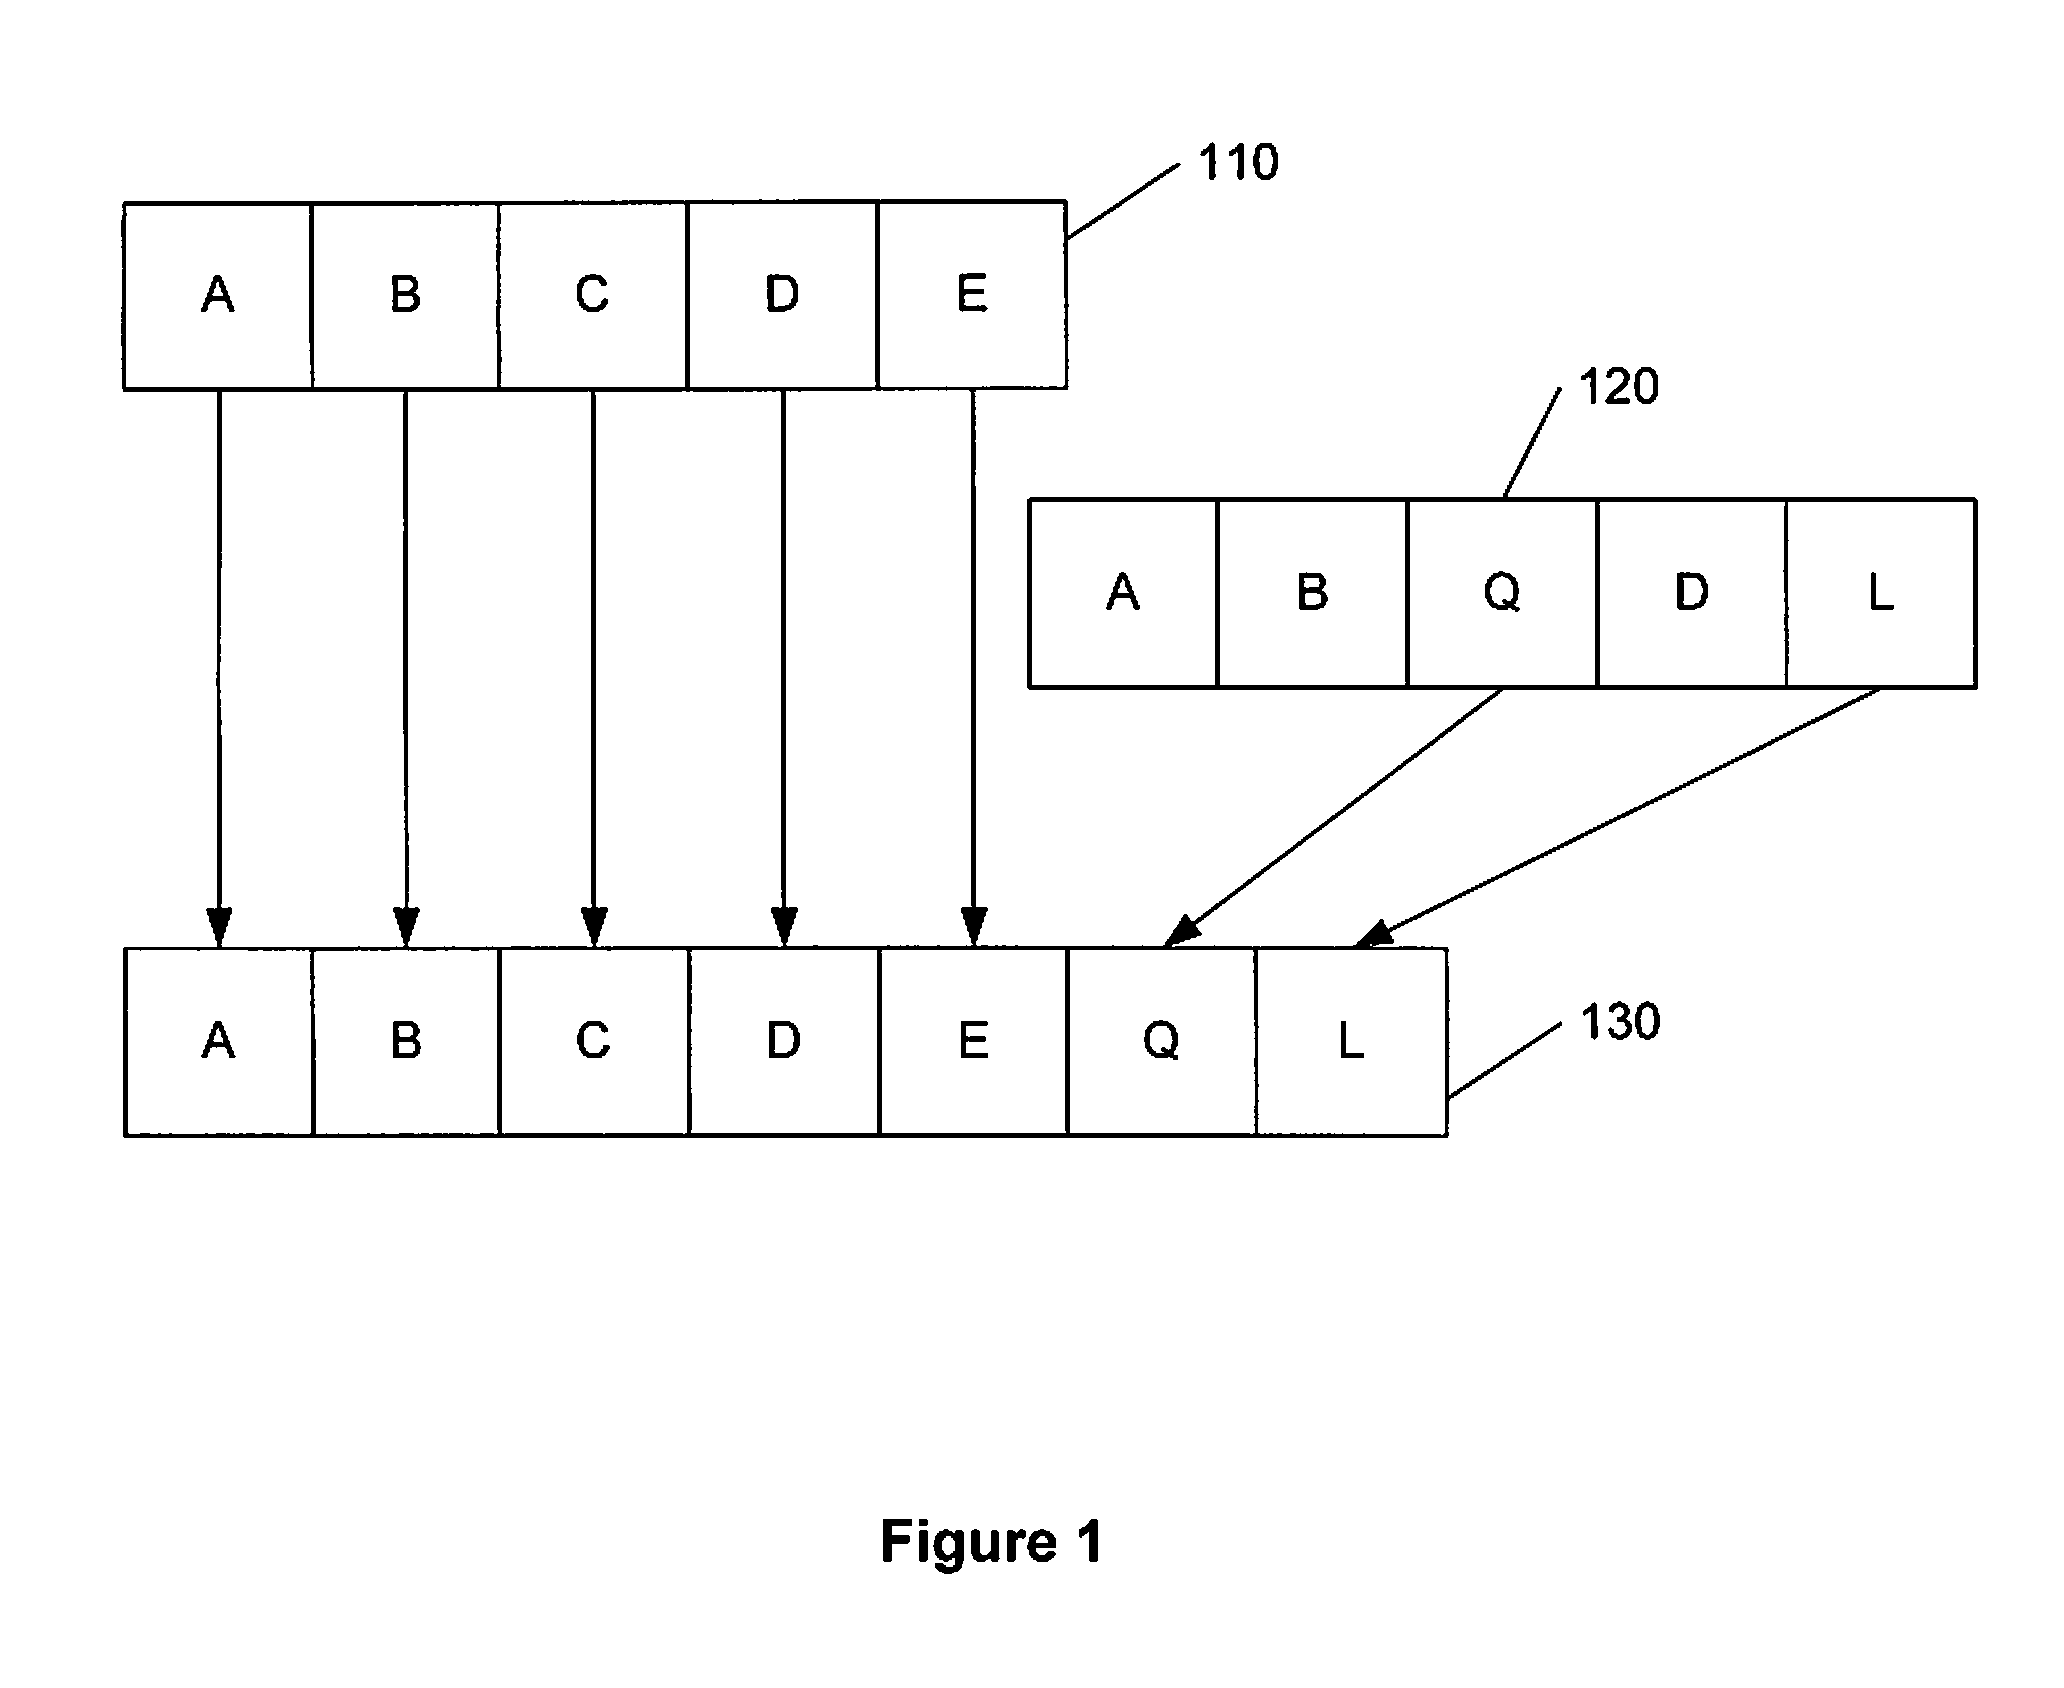 Method and system for improving performance with single-instance-storage volumes by leveraging data locality